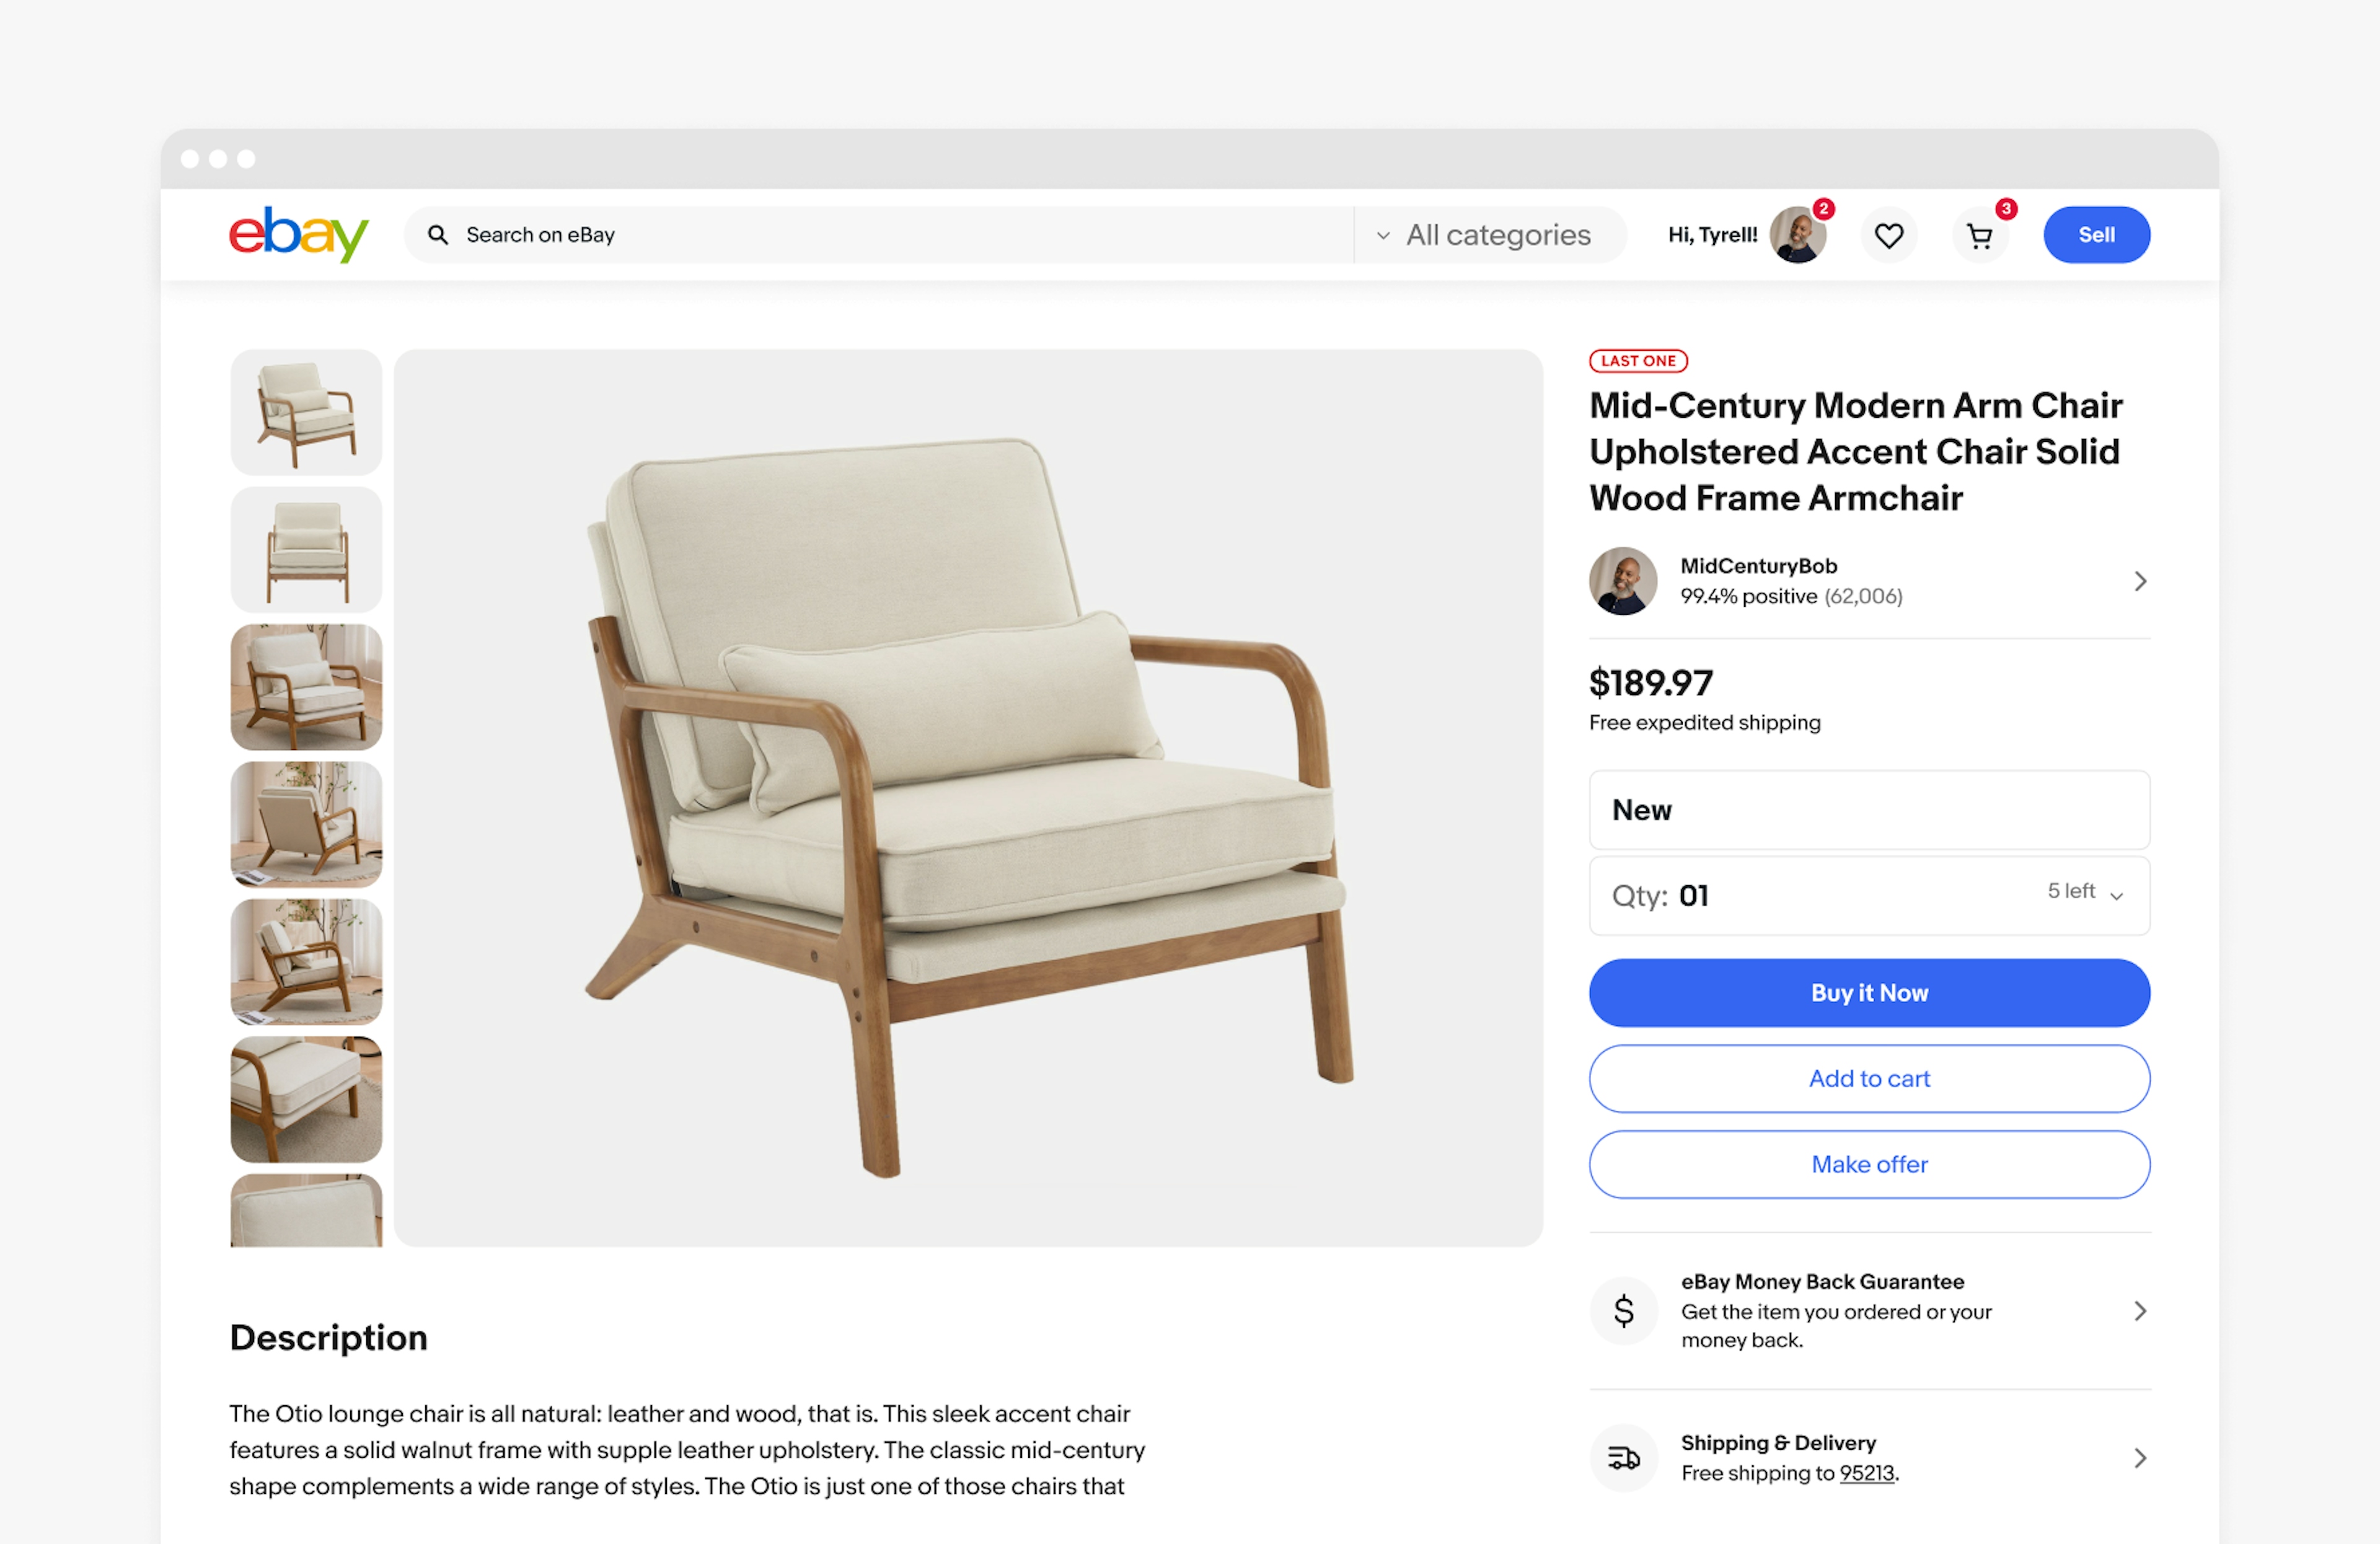 A desktop view item web page of a chair with the logo in the upper left corner of the site.